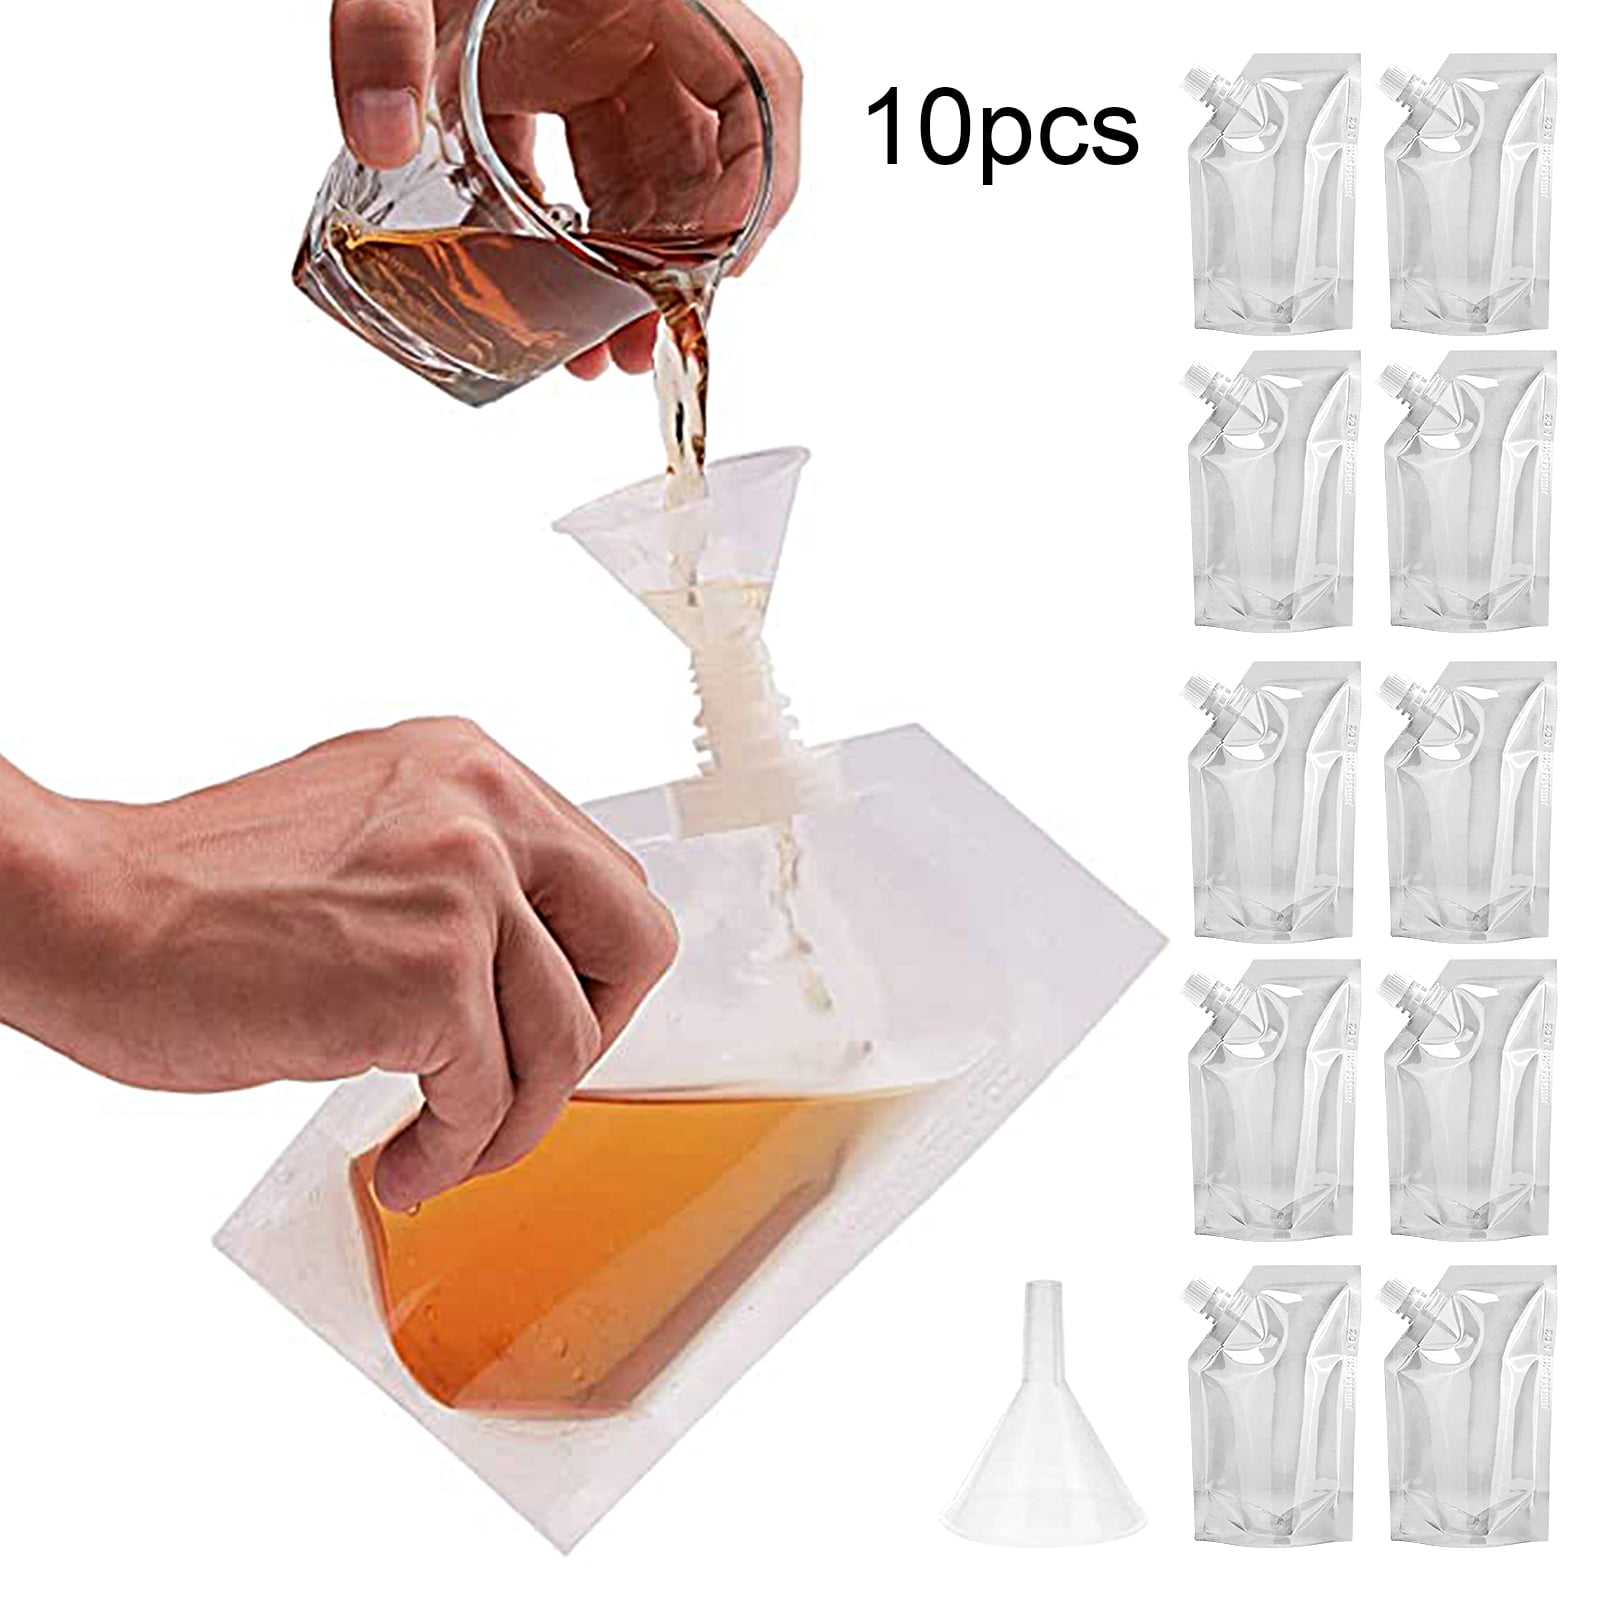 LINASHI 1 Set 350ML/500ML/200ML/100ML/1000ML Plastic Liquor Pouches  Drinking Flasks Reusable Liquid Hide Bags with Silicone Funnel Included 